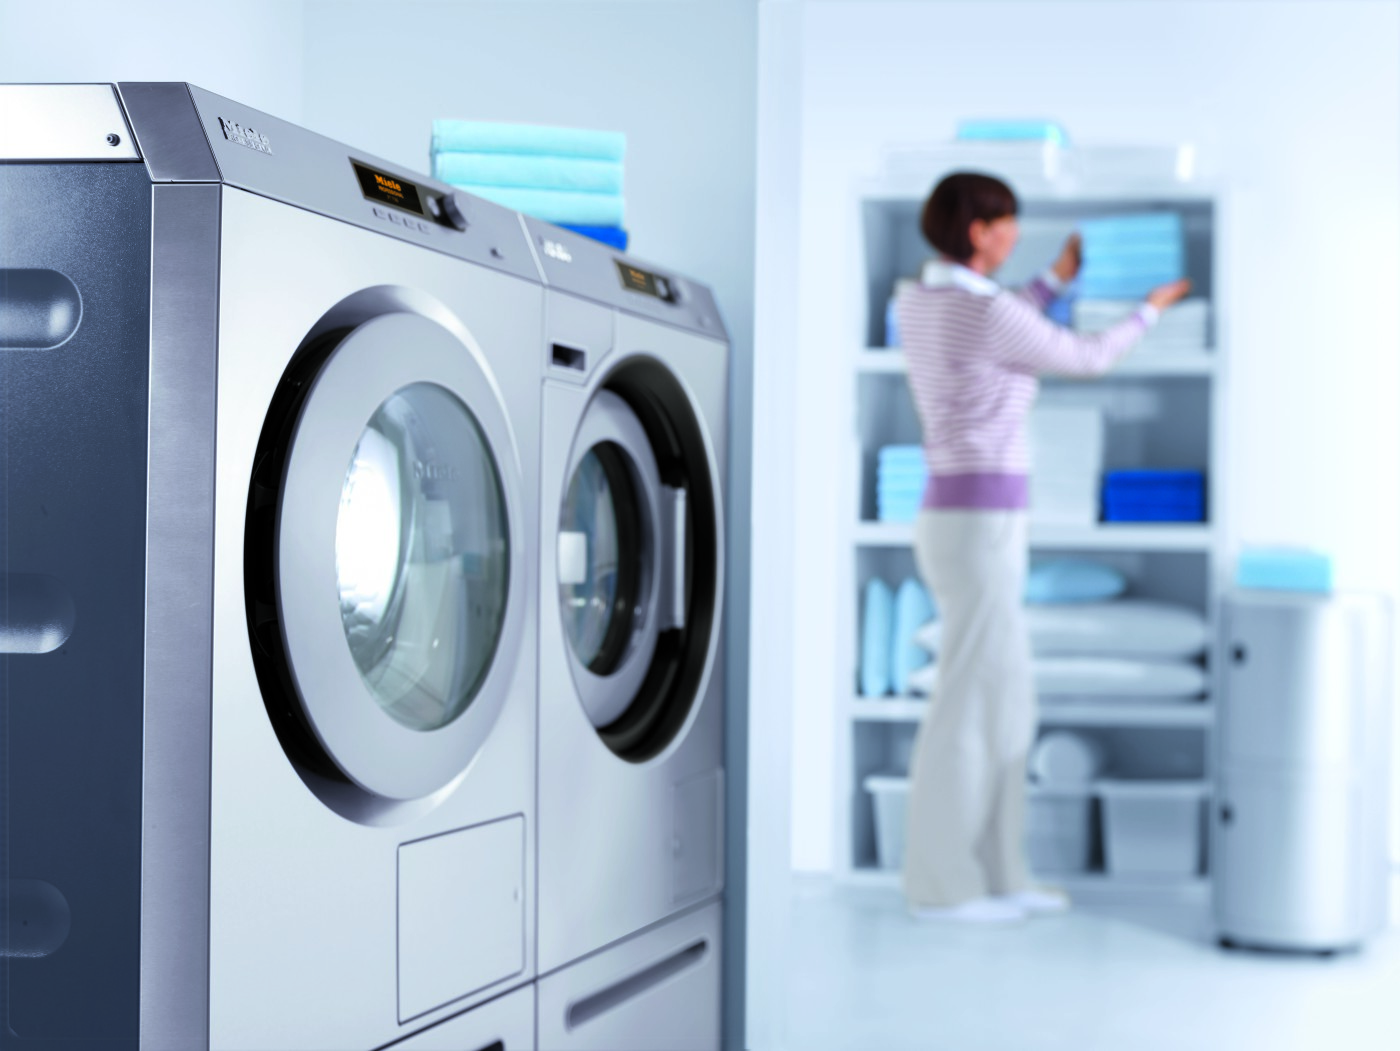 Laundry cleaning. Air Conditioner and Laundry Machine. Laundry. Commercial washing Machine. Laundry Lift.